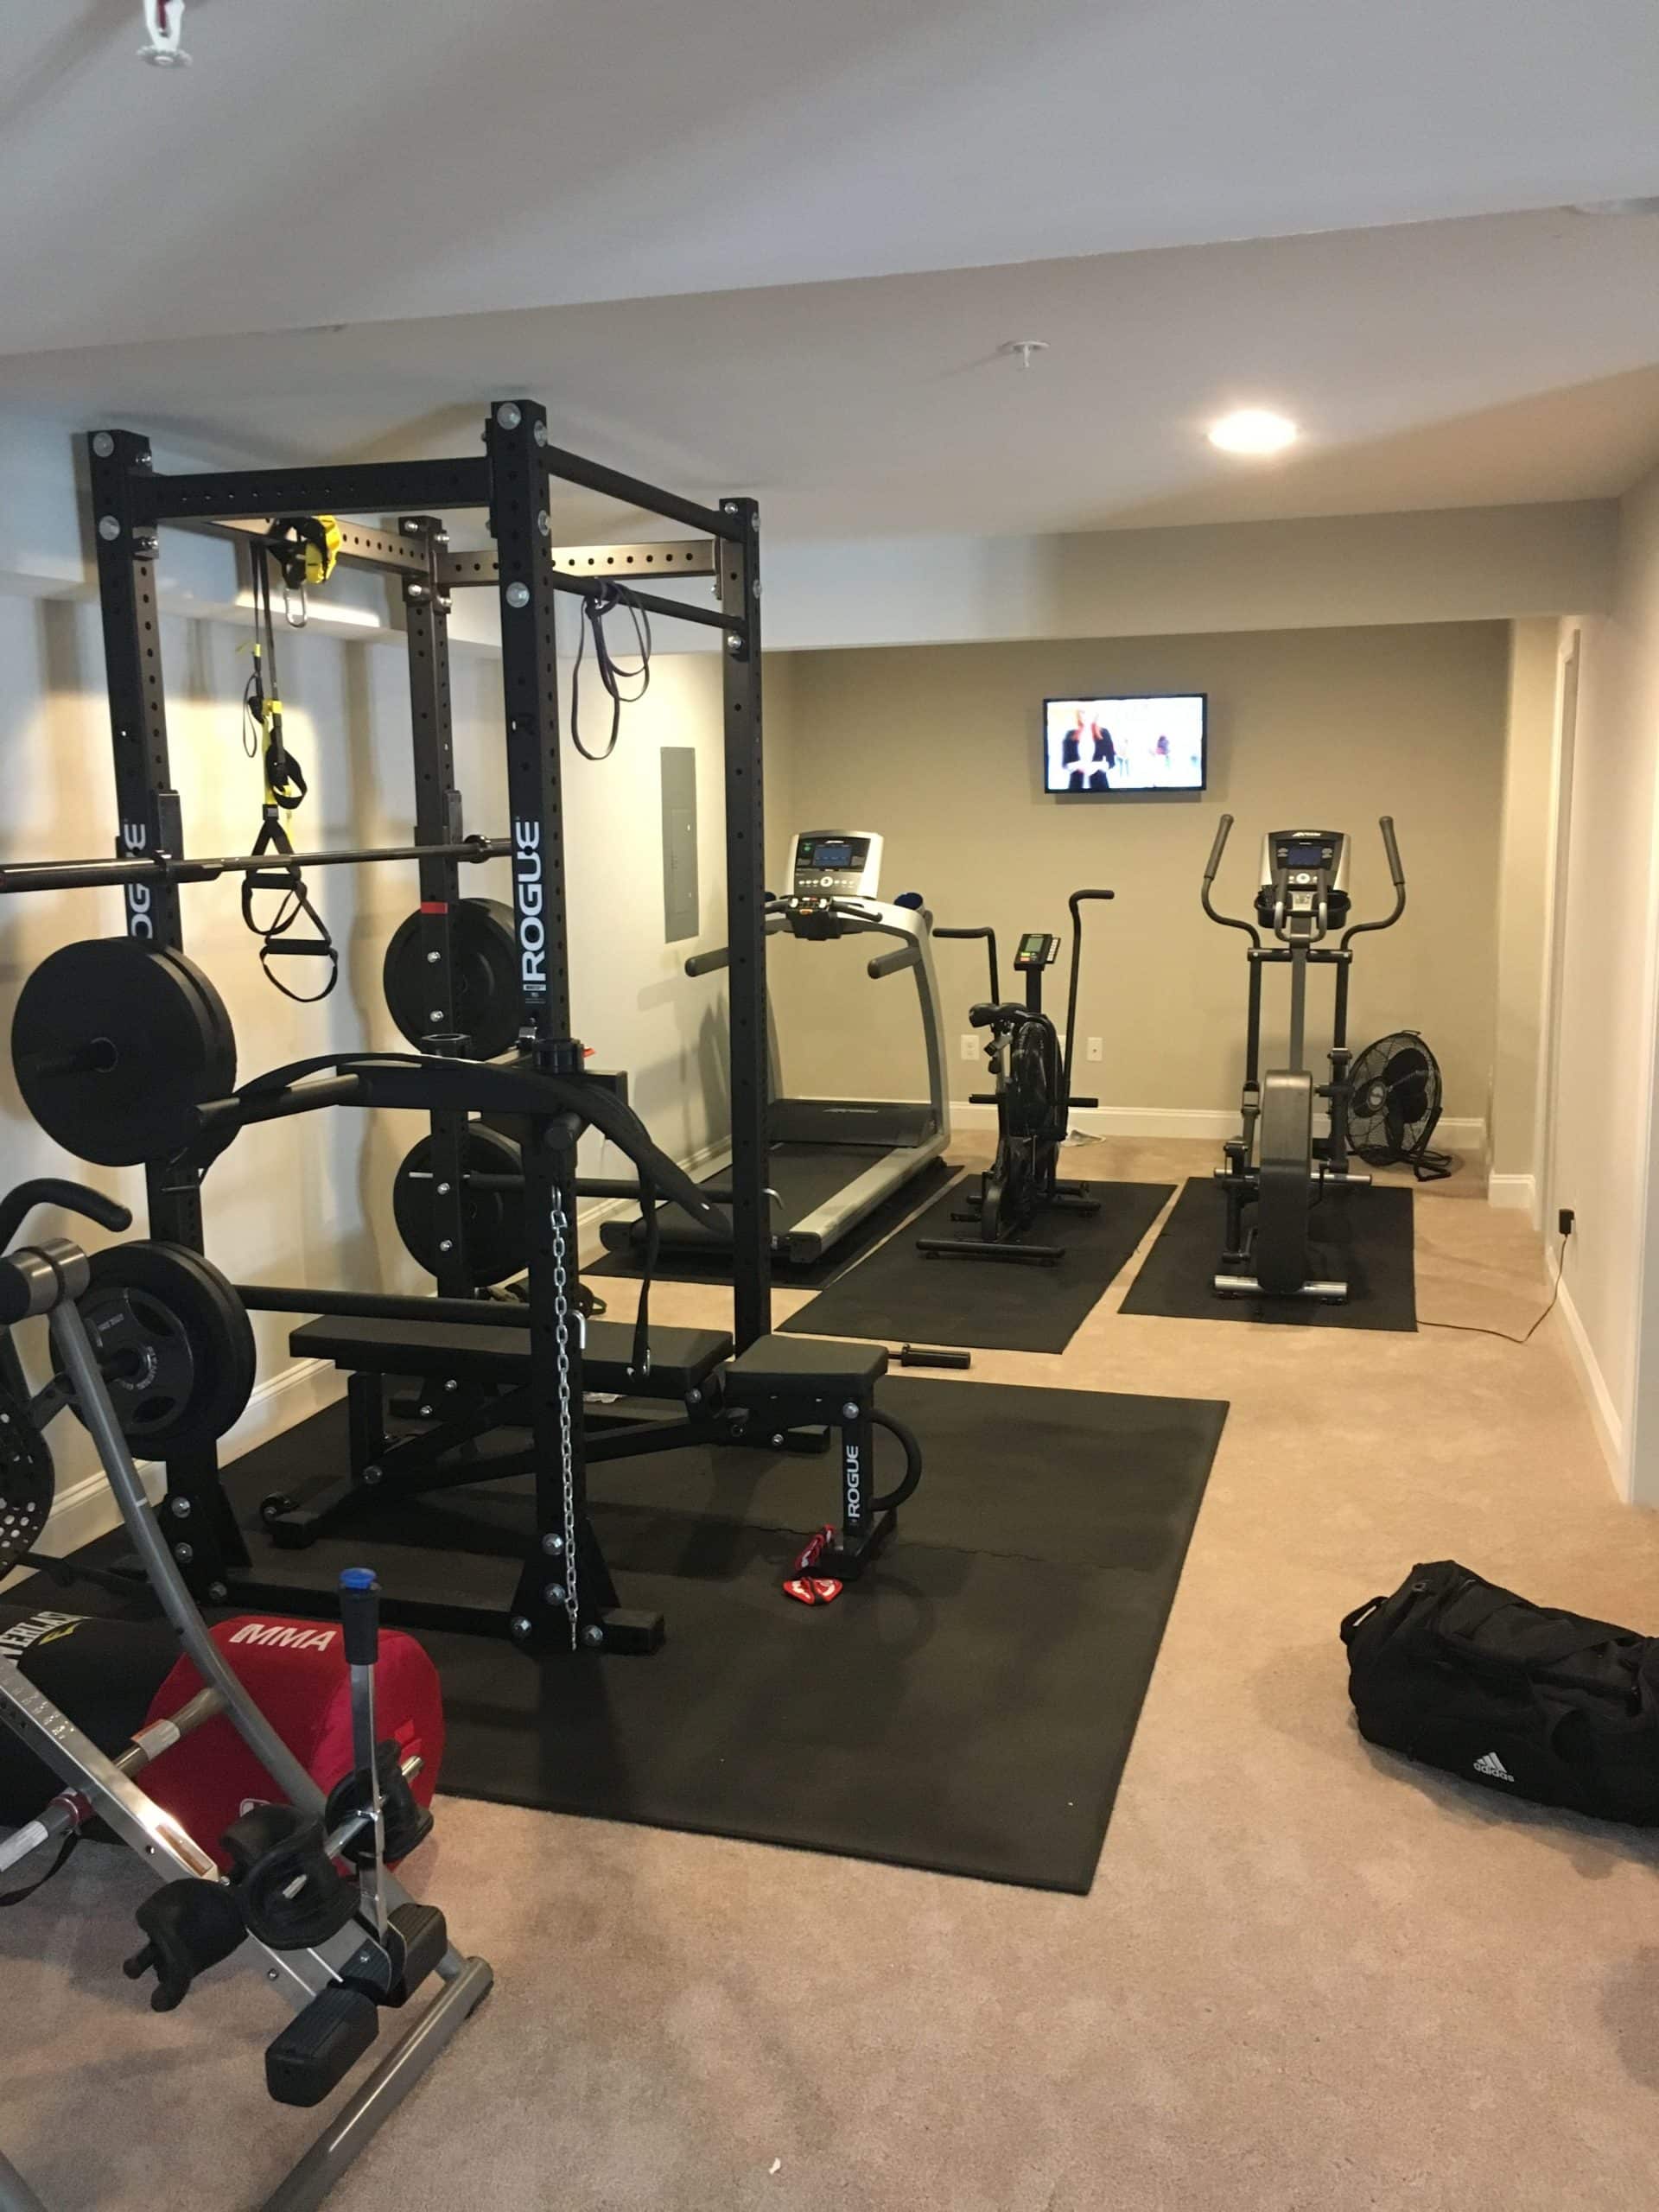 gym at home ideas